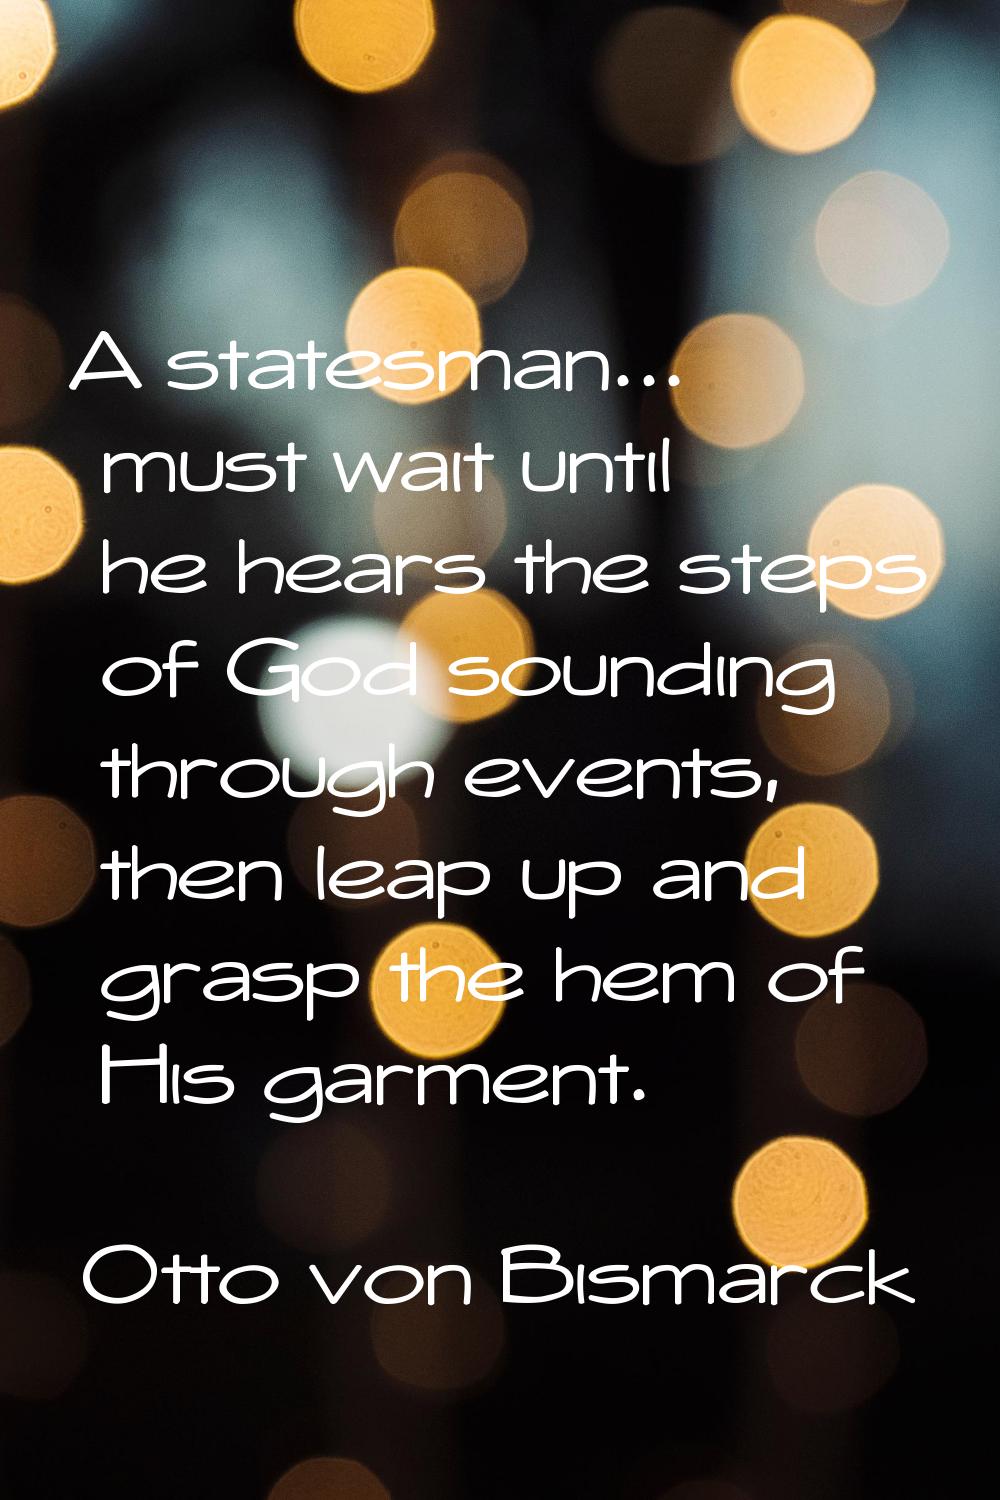 A statesman... must wait until he hears the steps of God sounding through events, then leap up and 